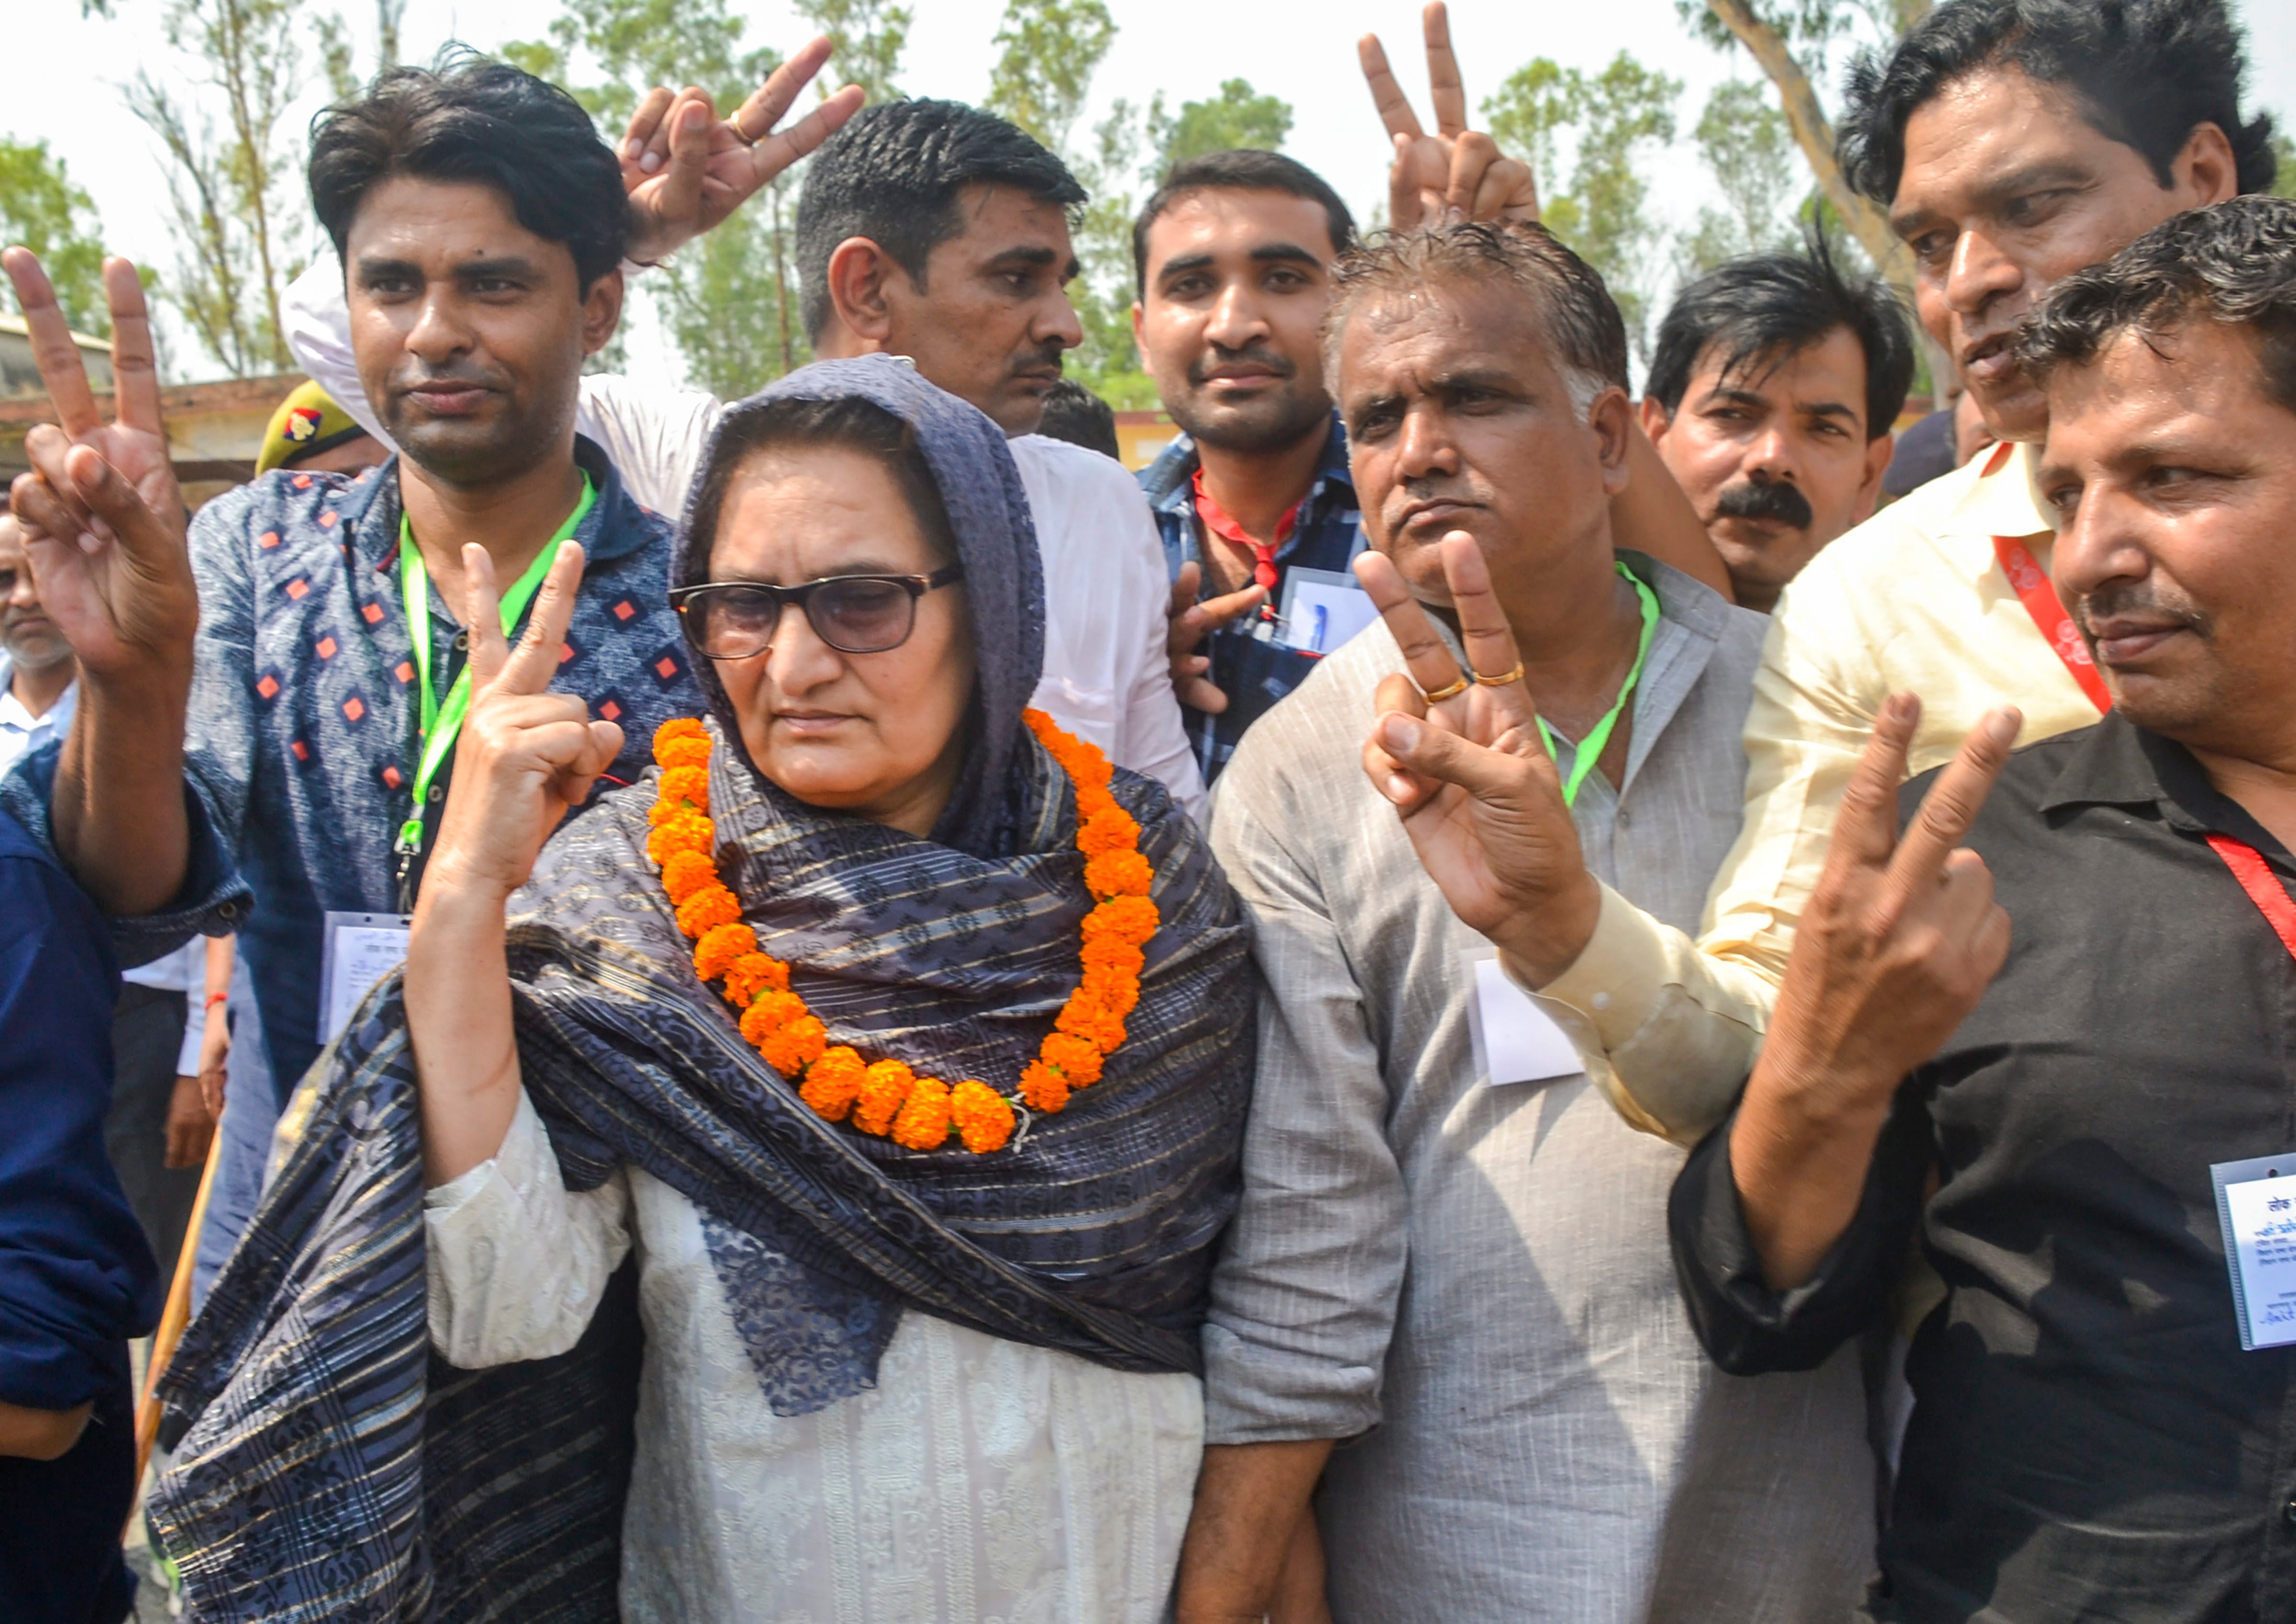 Rashtriya Lok Dal candidate Tabassum Hasan with her supporters outside a counting centre after winning the Kairana Lok Sabha by-elections, in Kairana on Thursday, May 31, 2018. Hasan was also supported by the Congress, Samajwadi Party and Bahujan Samaj Party. PTI file photo